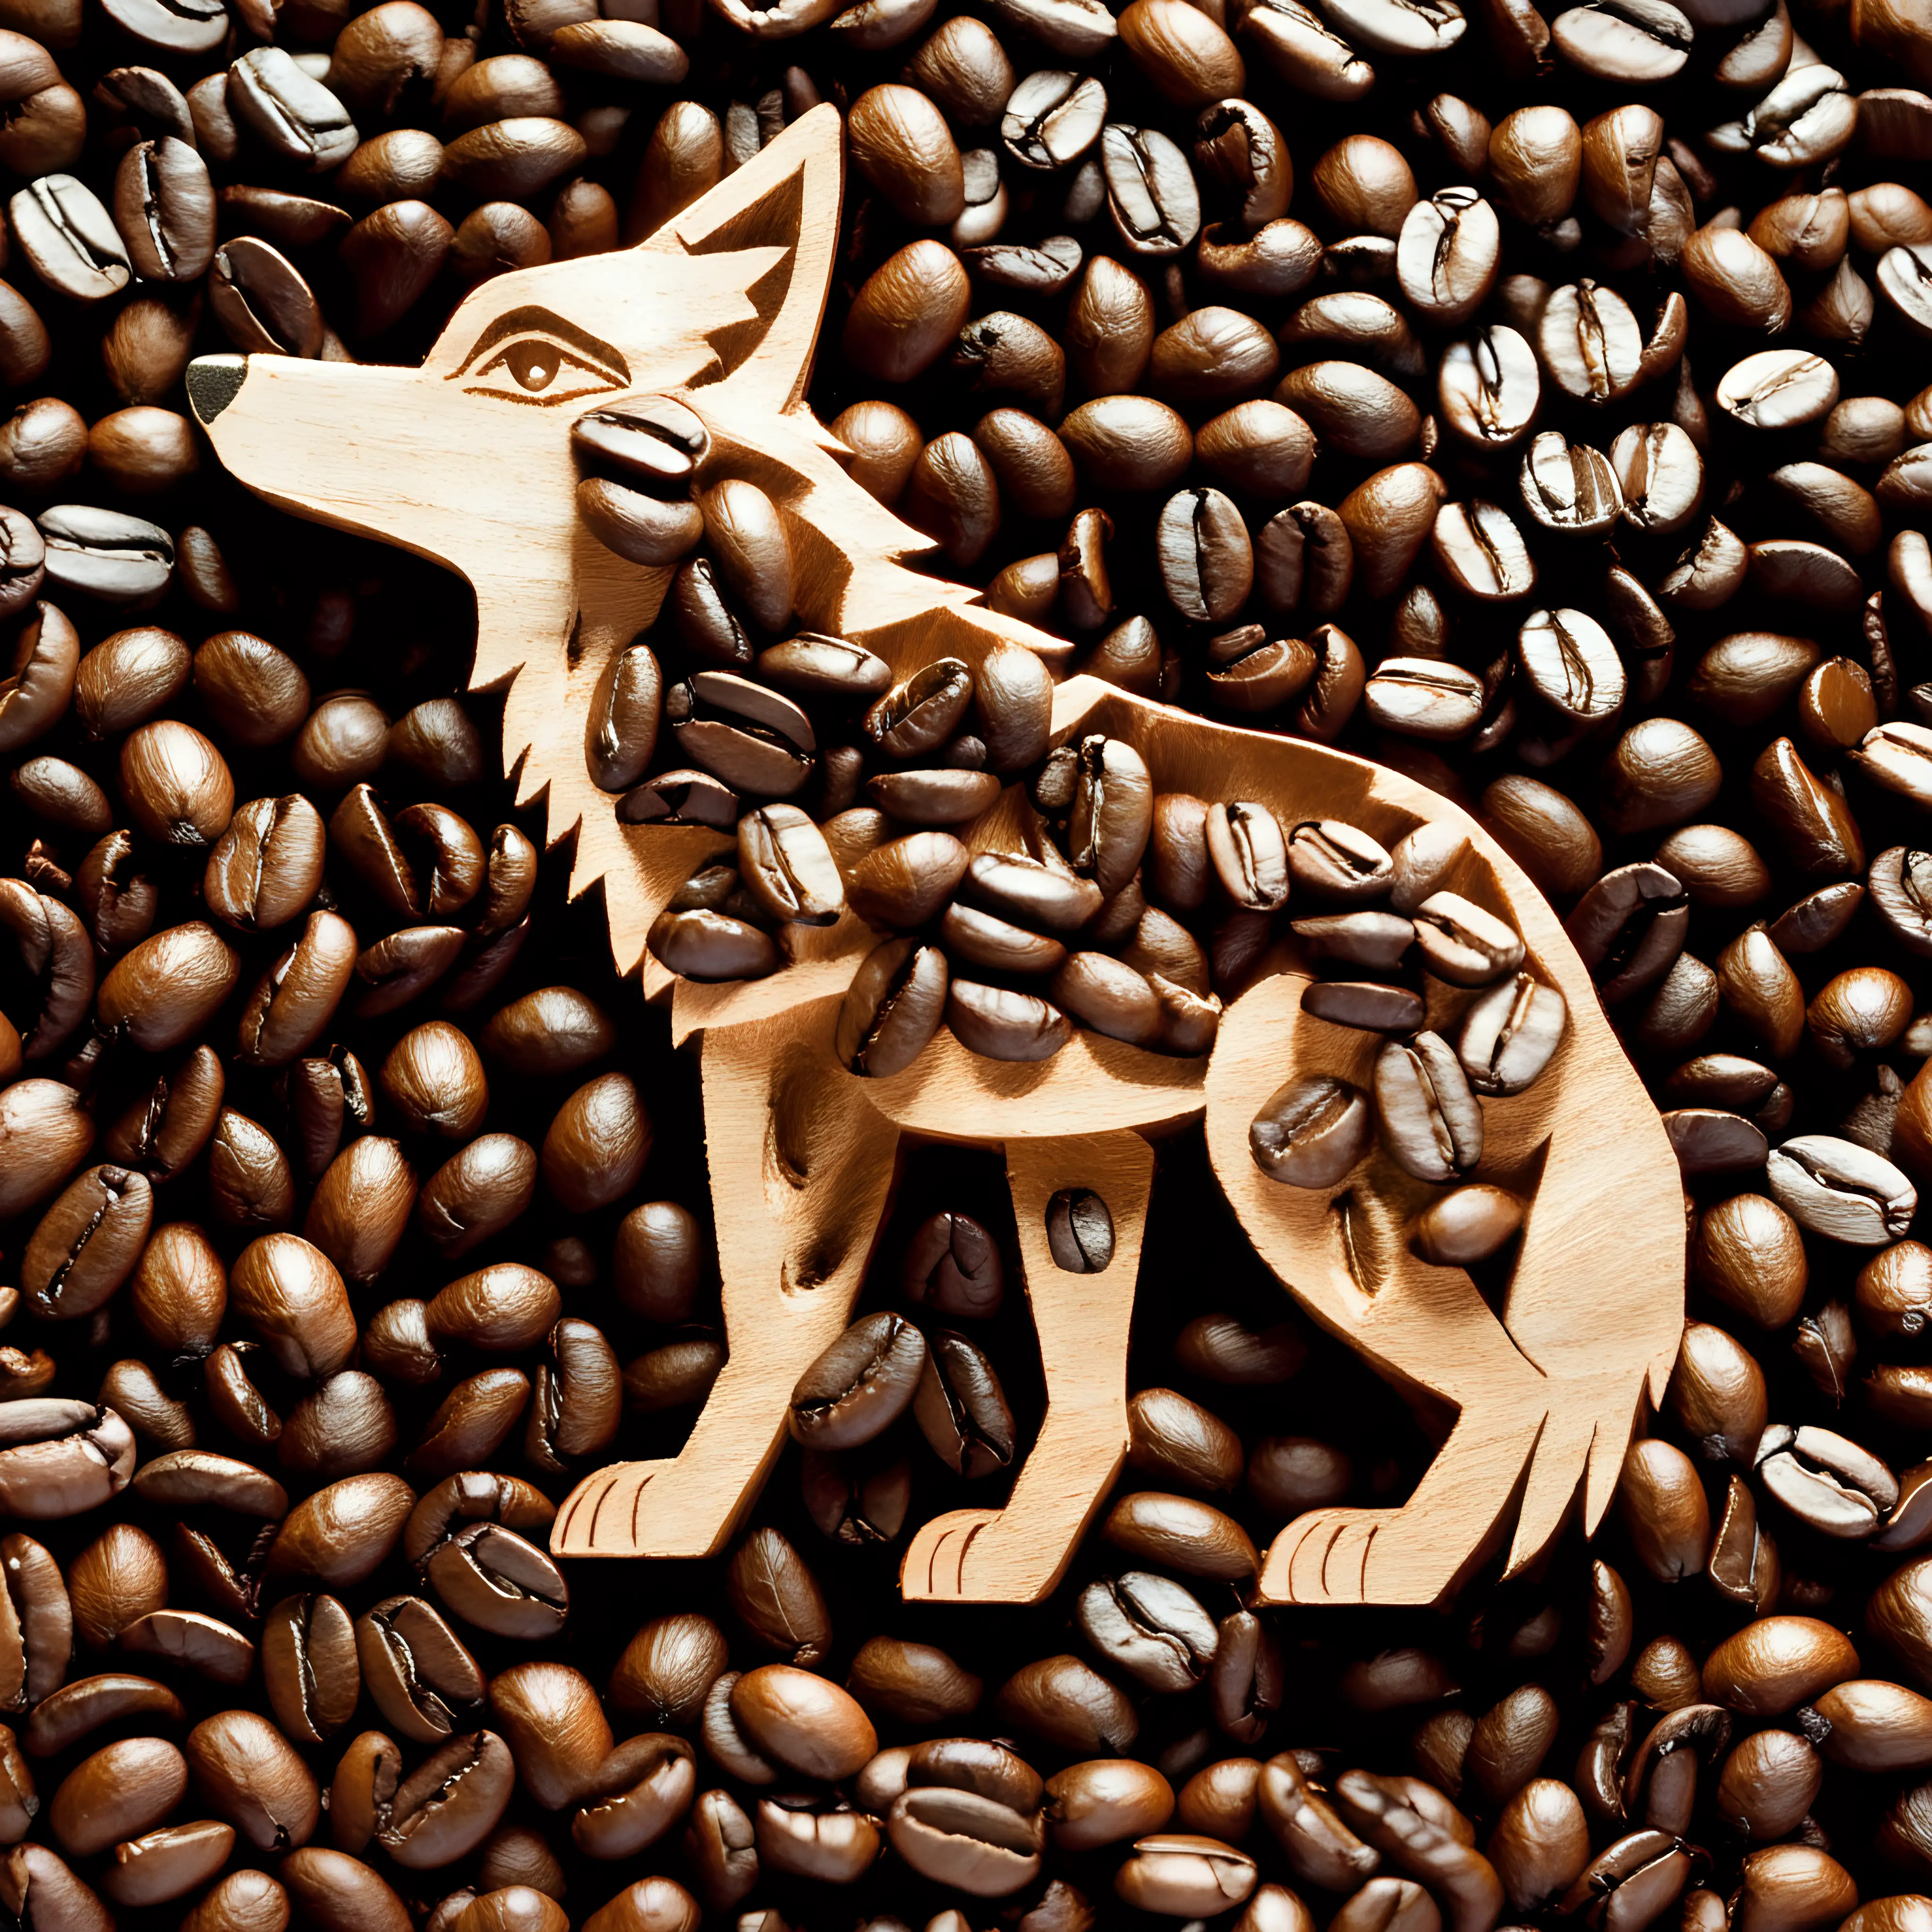 Roasted Coffee grains forming the shape of a beautiful  howling coyote.  